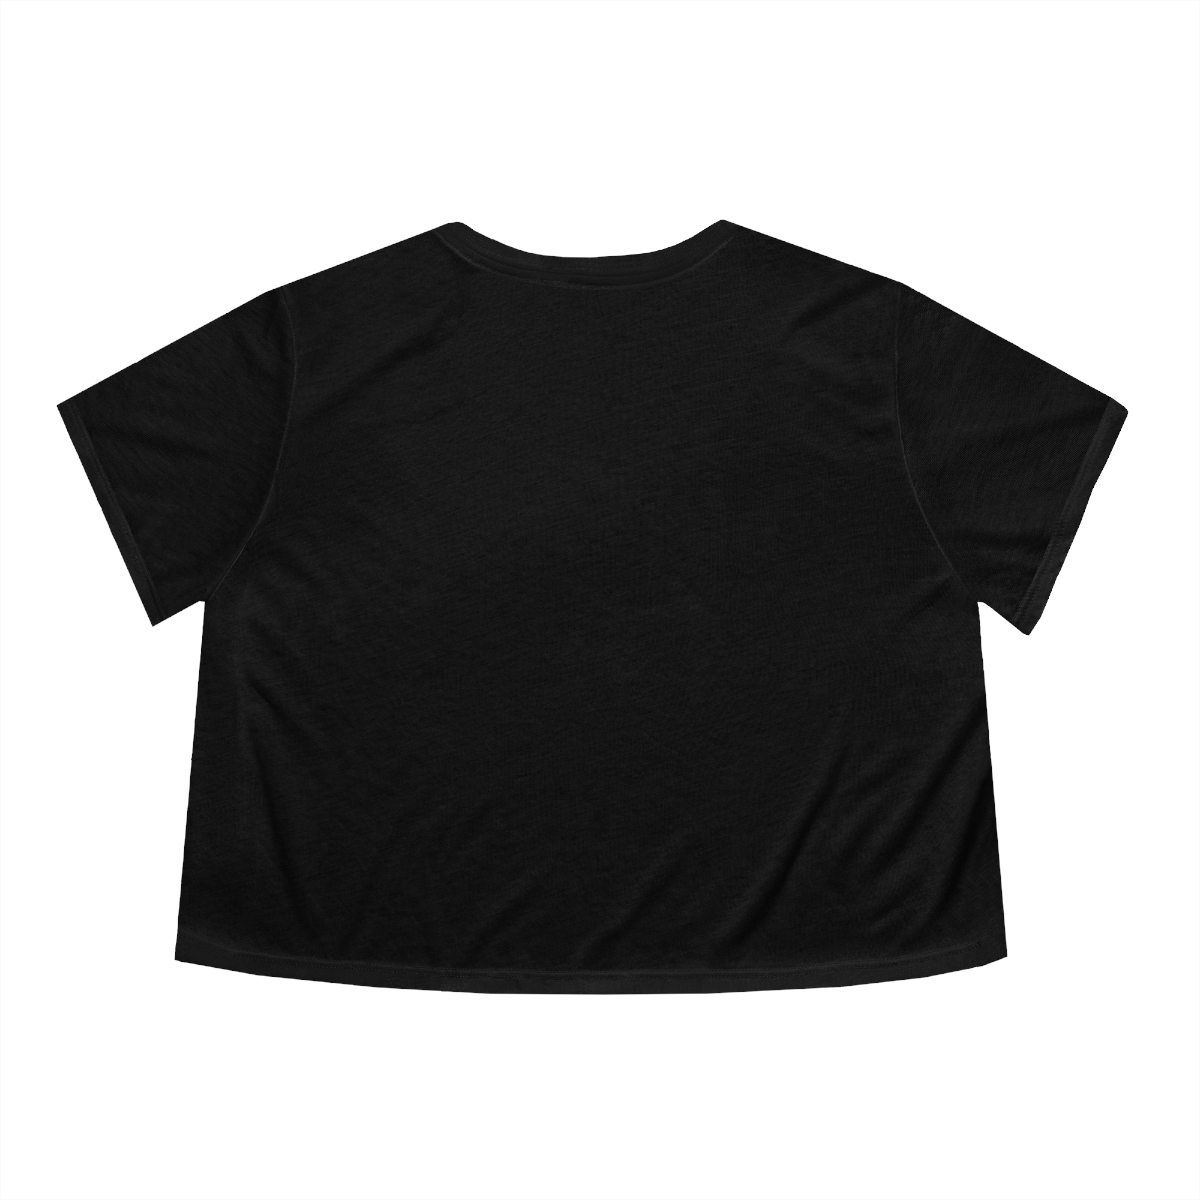 WING IT Pride Crop Top product thumbnail image